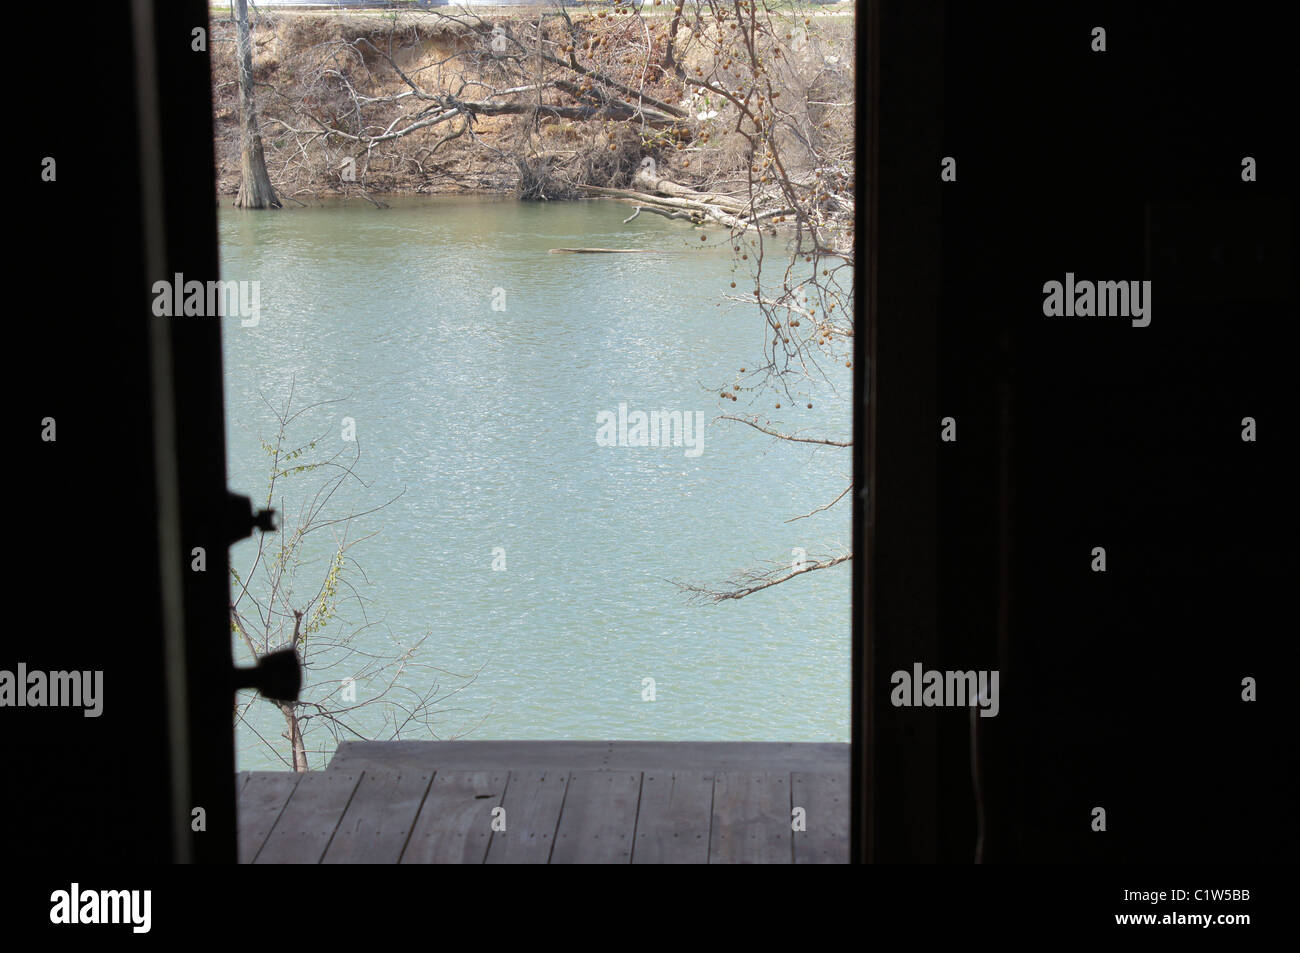 this is a photo of a river as seen by looking through a door to the outside.  The river and opposite bank are clearly visibl2. Stock Photo